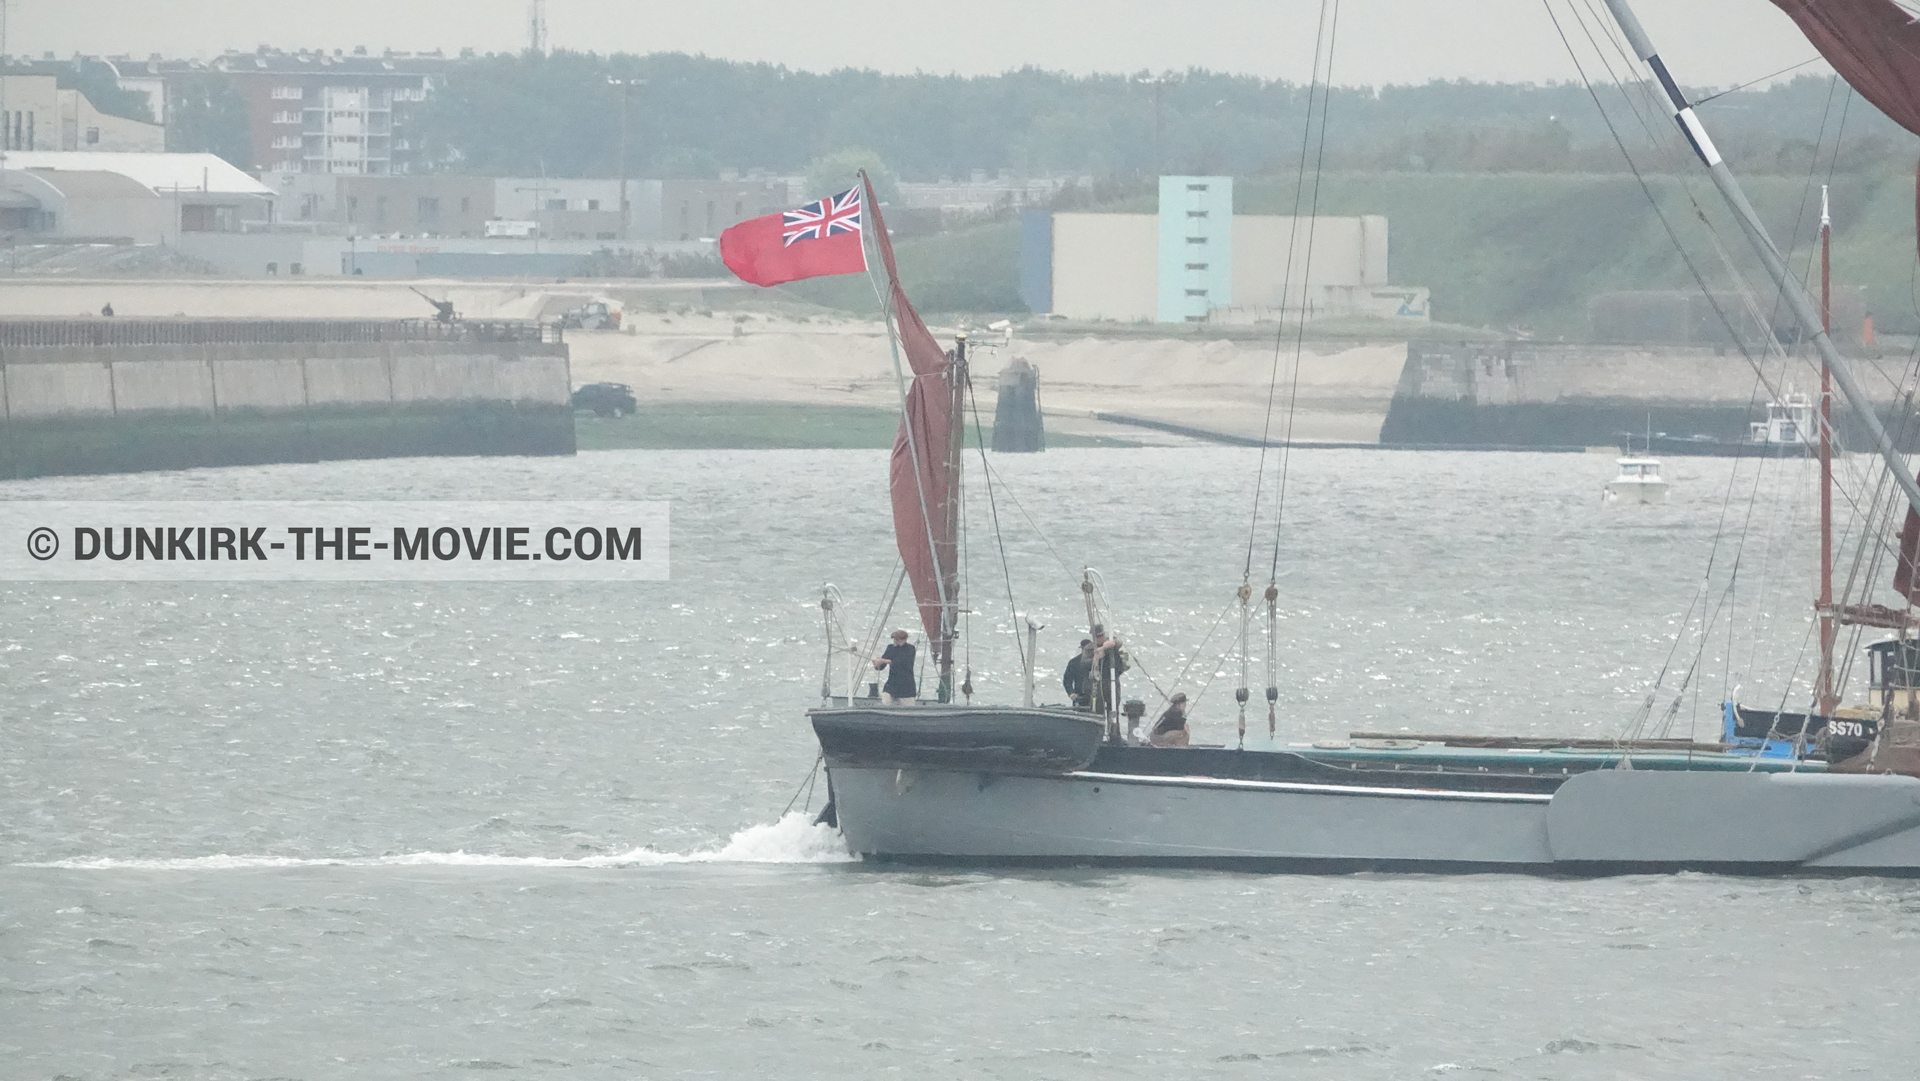 Picture with boat, Xylonite,  from behind the scene of the Dunkirk movie by Nolan